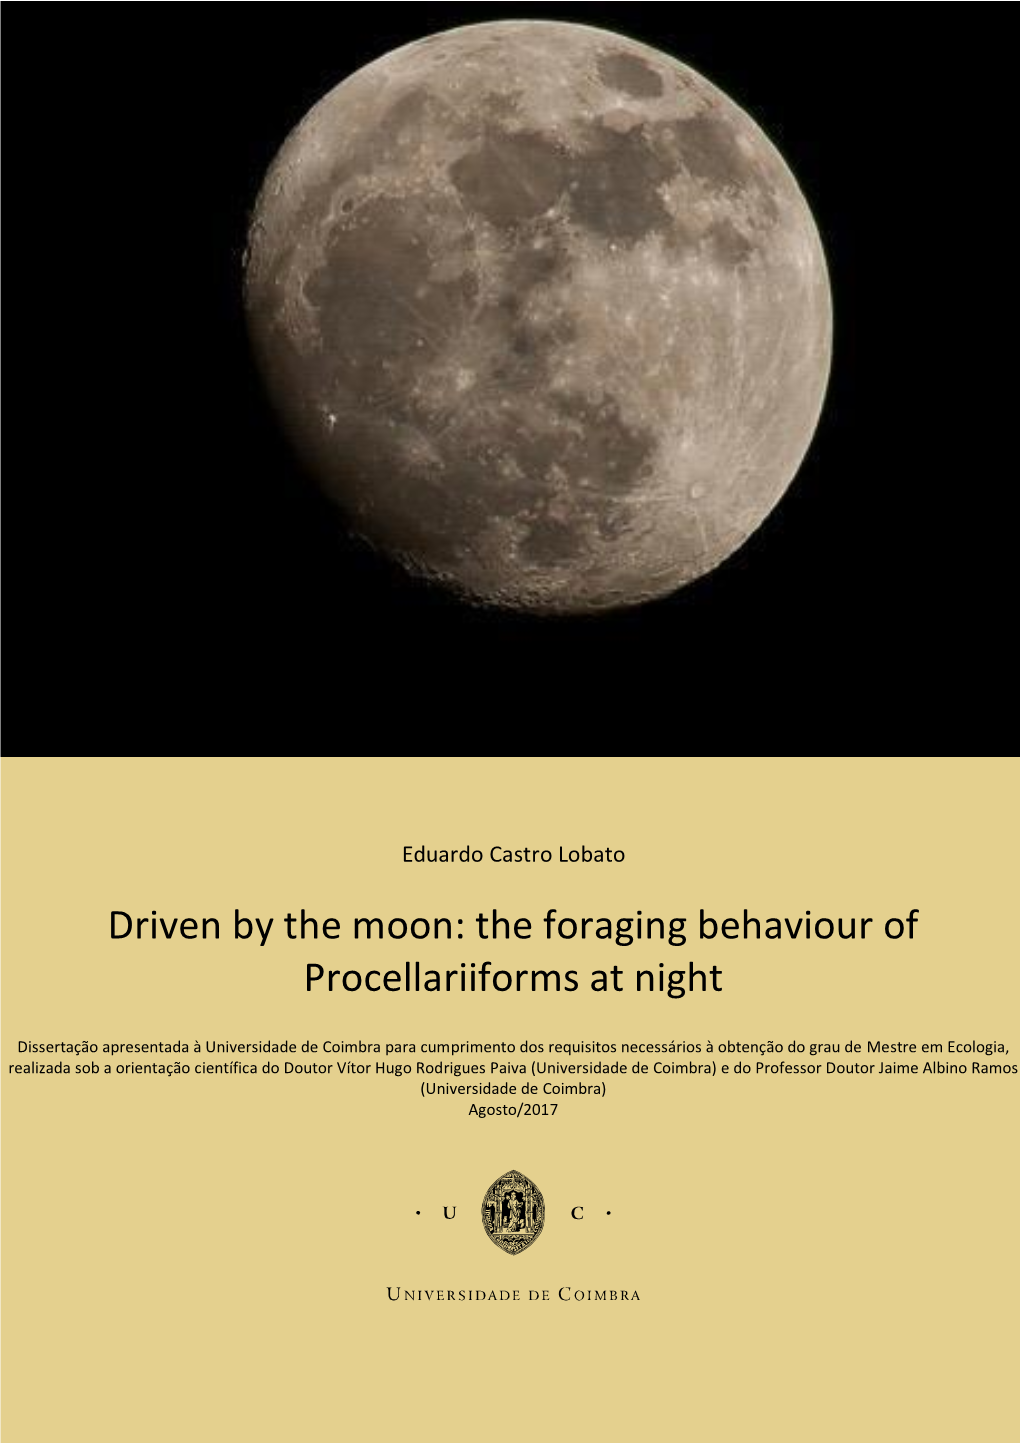 Driven by the Moon: the Foraging Behaviour of Procellariiforms at Night